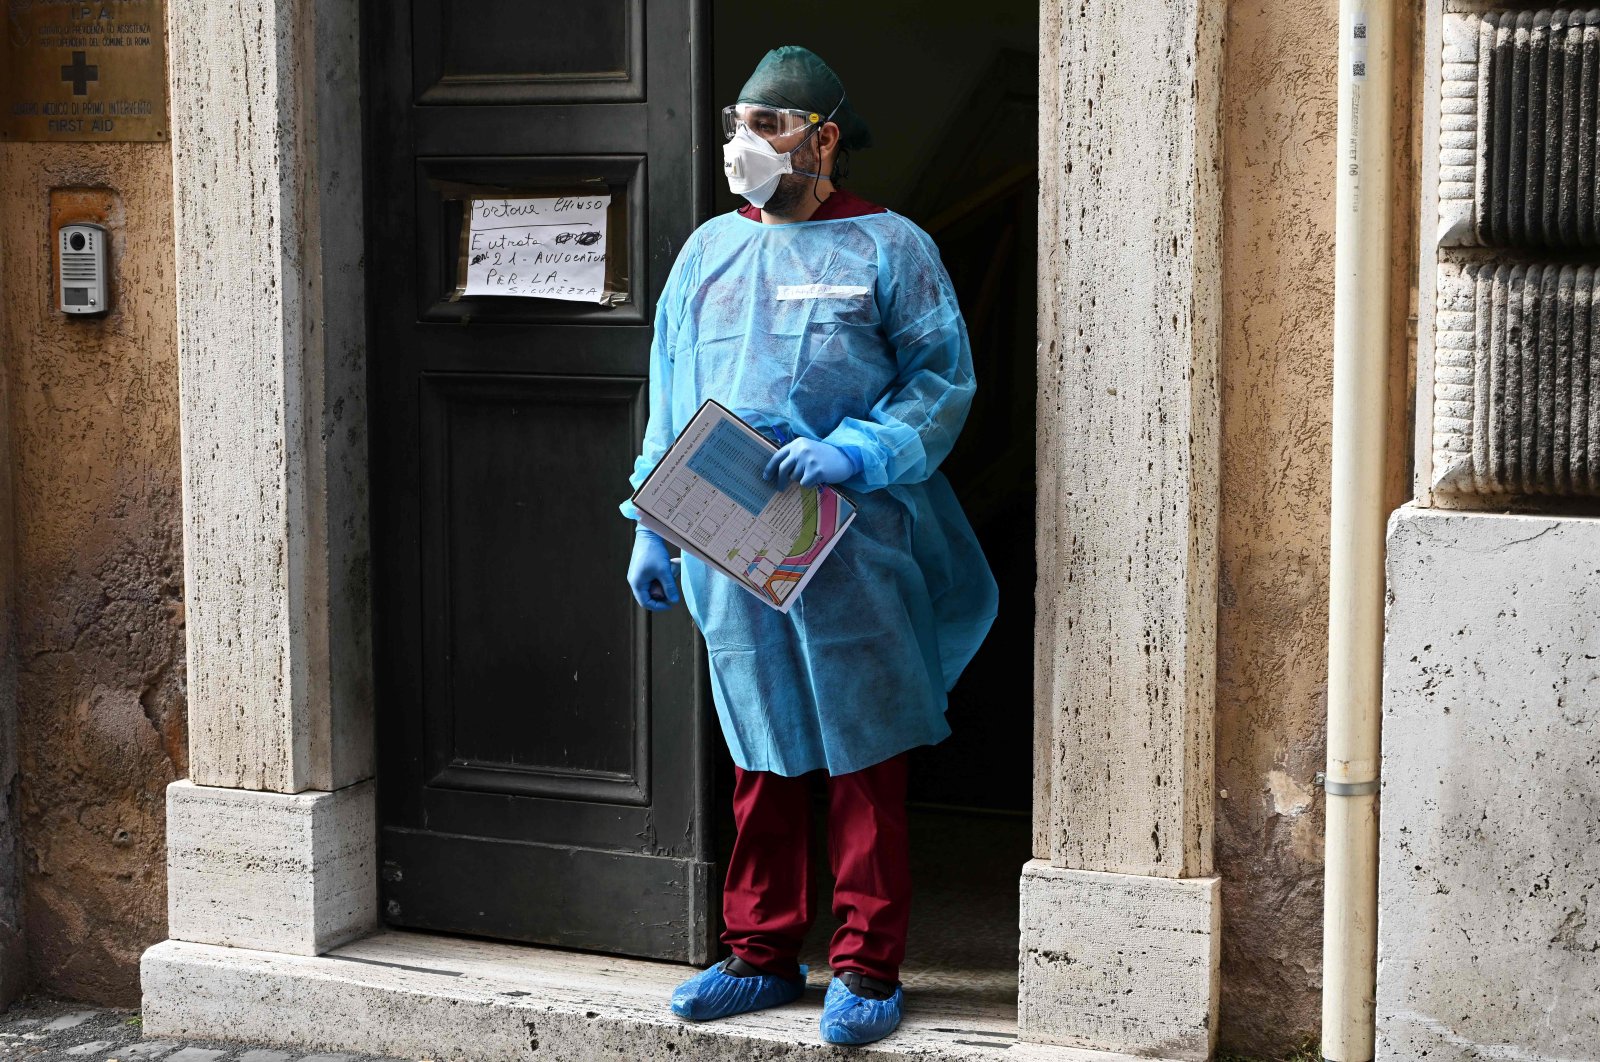 A medical worker welcomes people arriving to undergo serological tests for COVID-19 conducted on municipal workers, Rome, May 6, 2020. (AFP Photo)